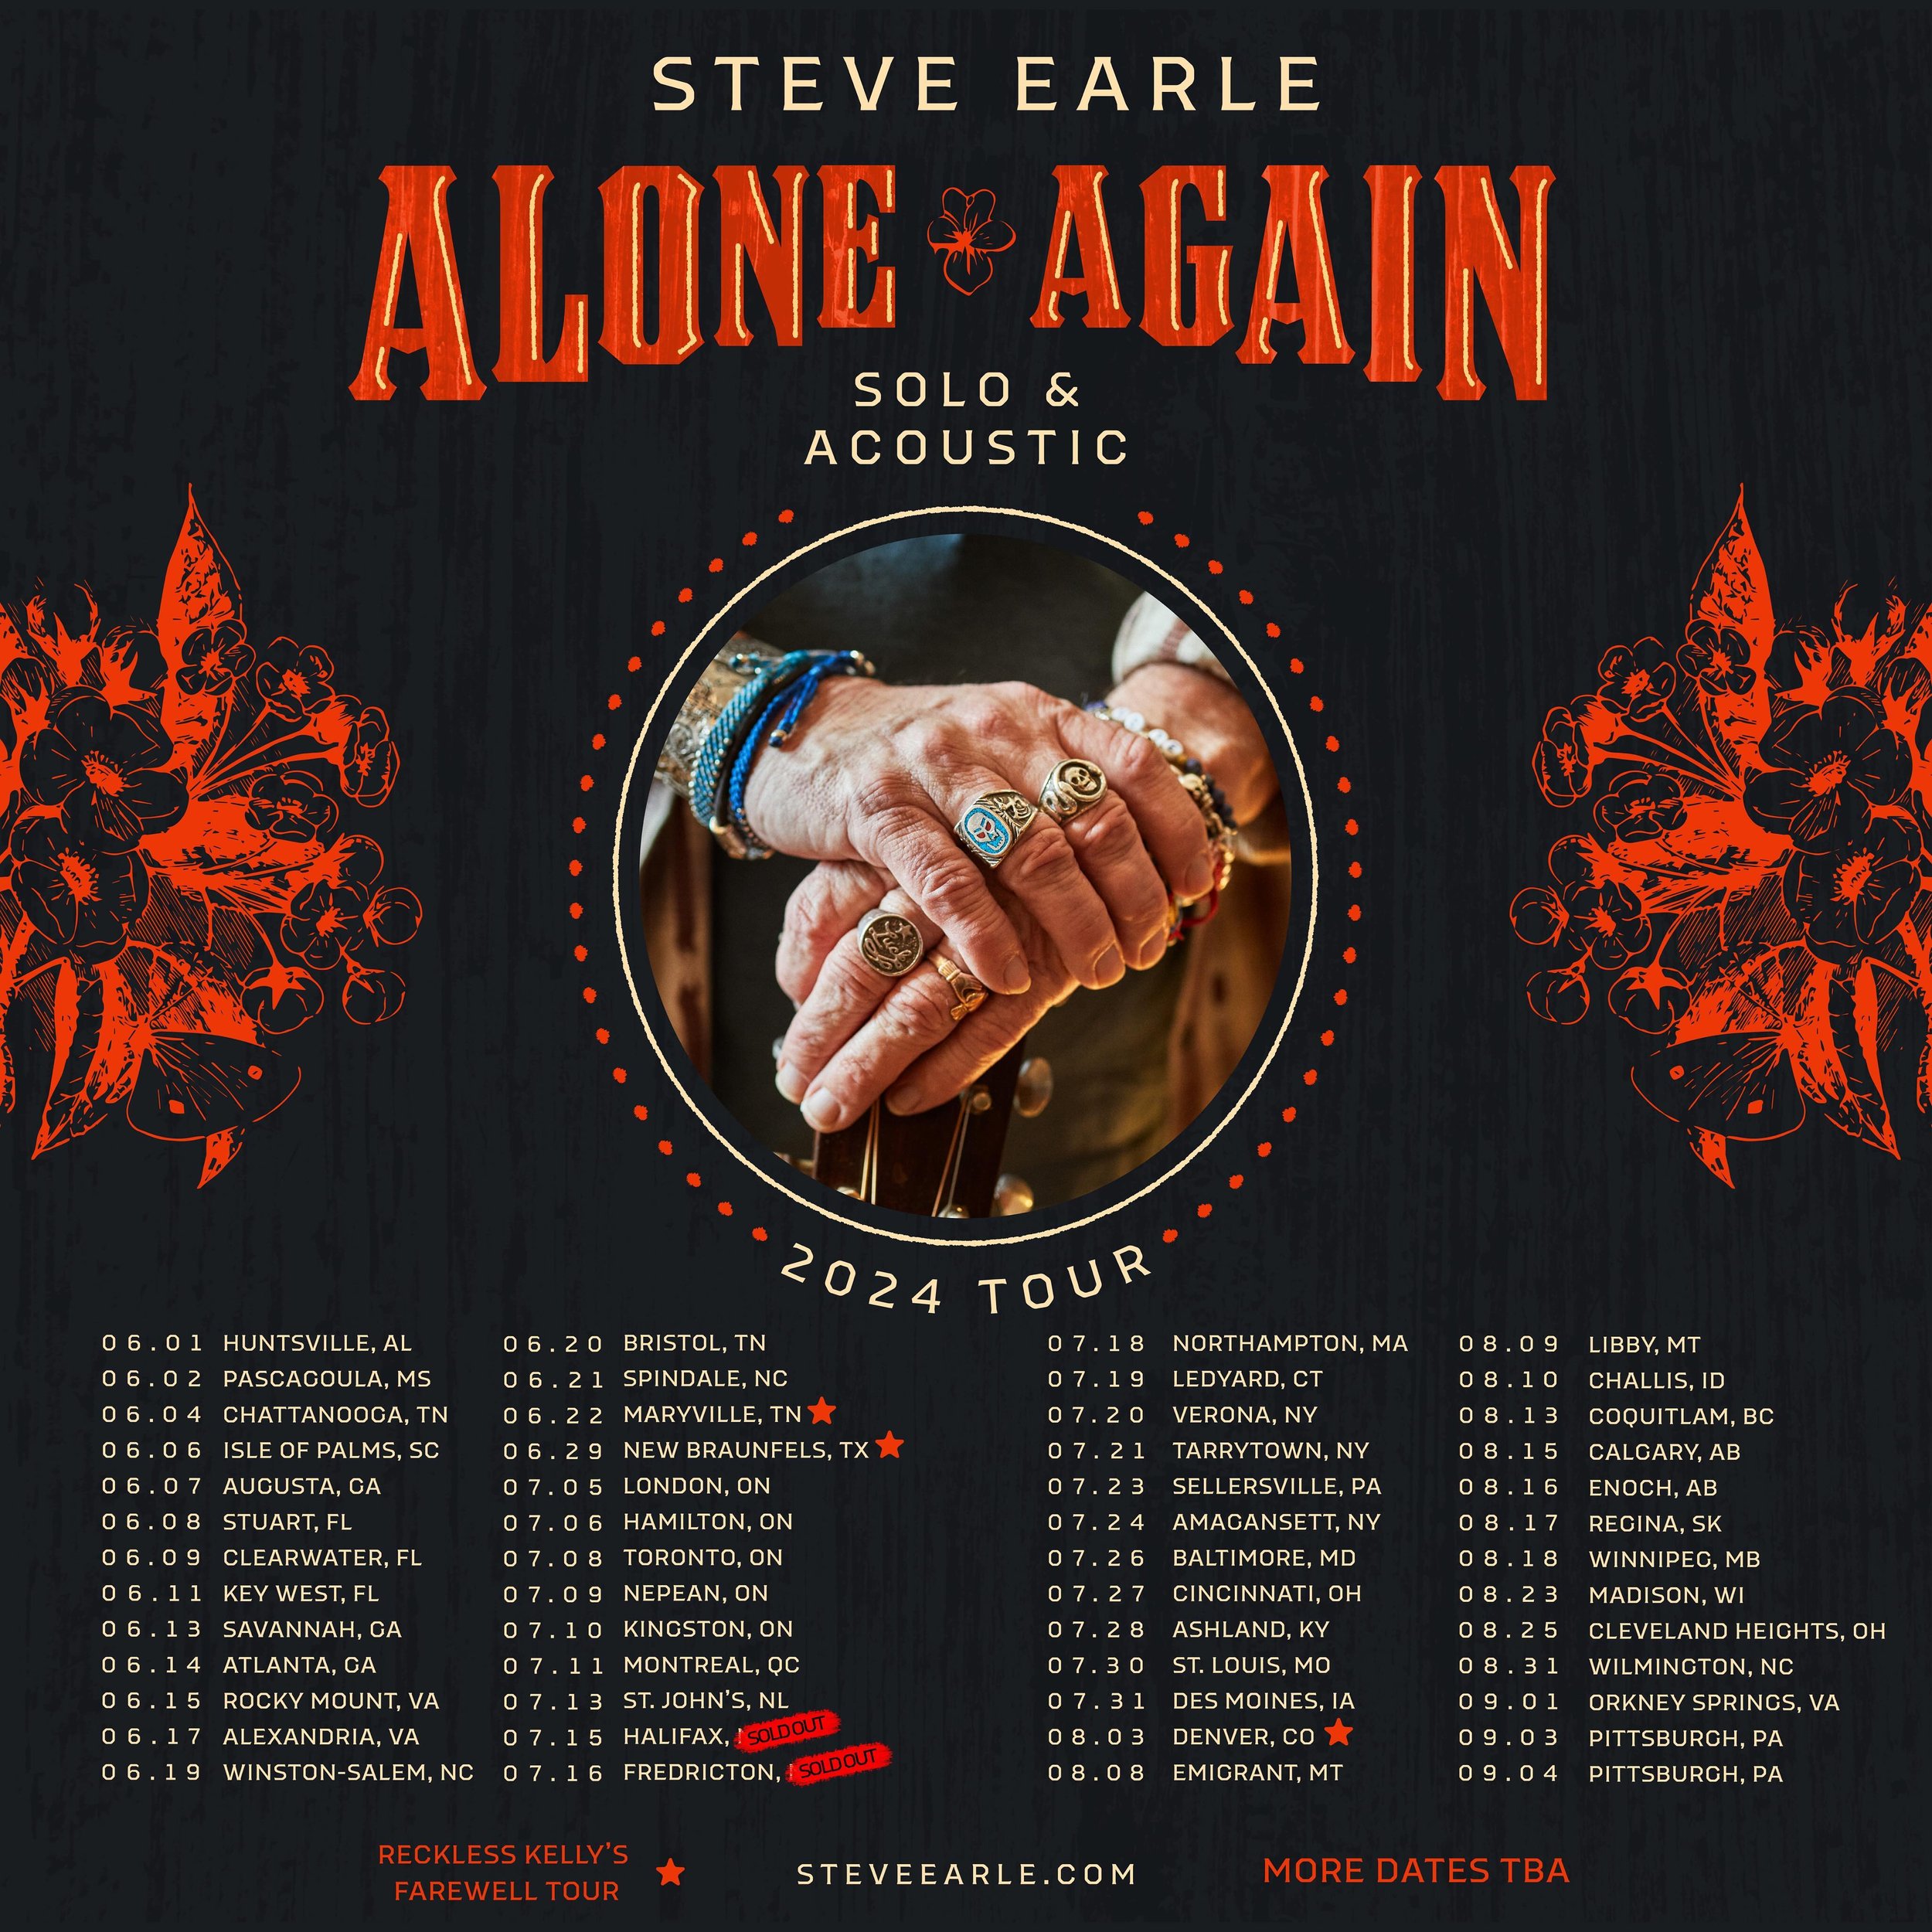 Catch @steveearle on his Alone Again Solo &amp; Acoustic 2024 Summer Tour! Grab your tickets to a show near you at the link in bio and stories.

More dates TBA!